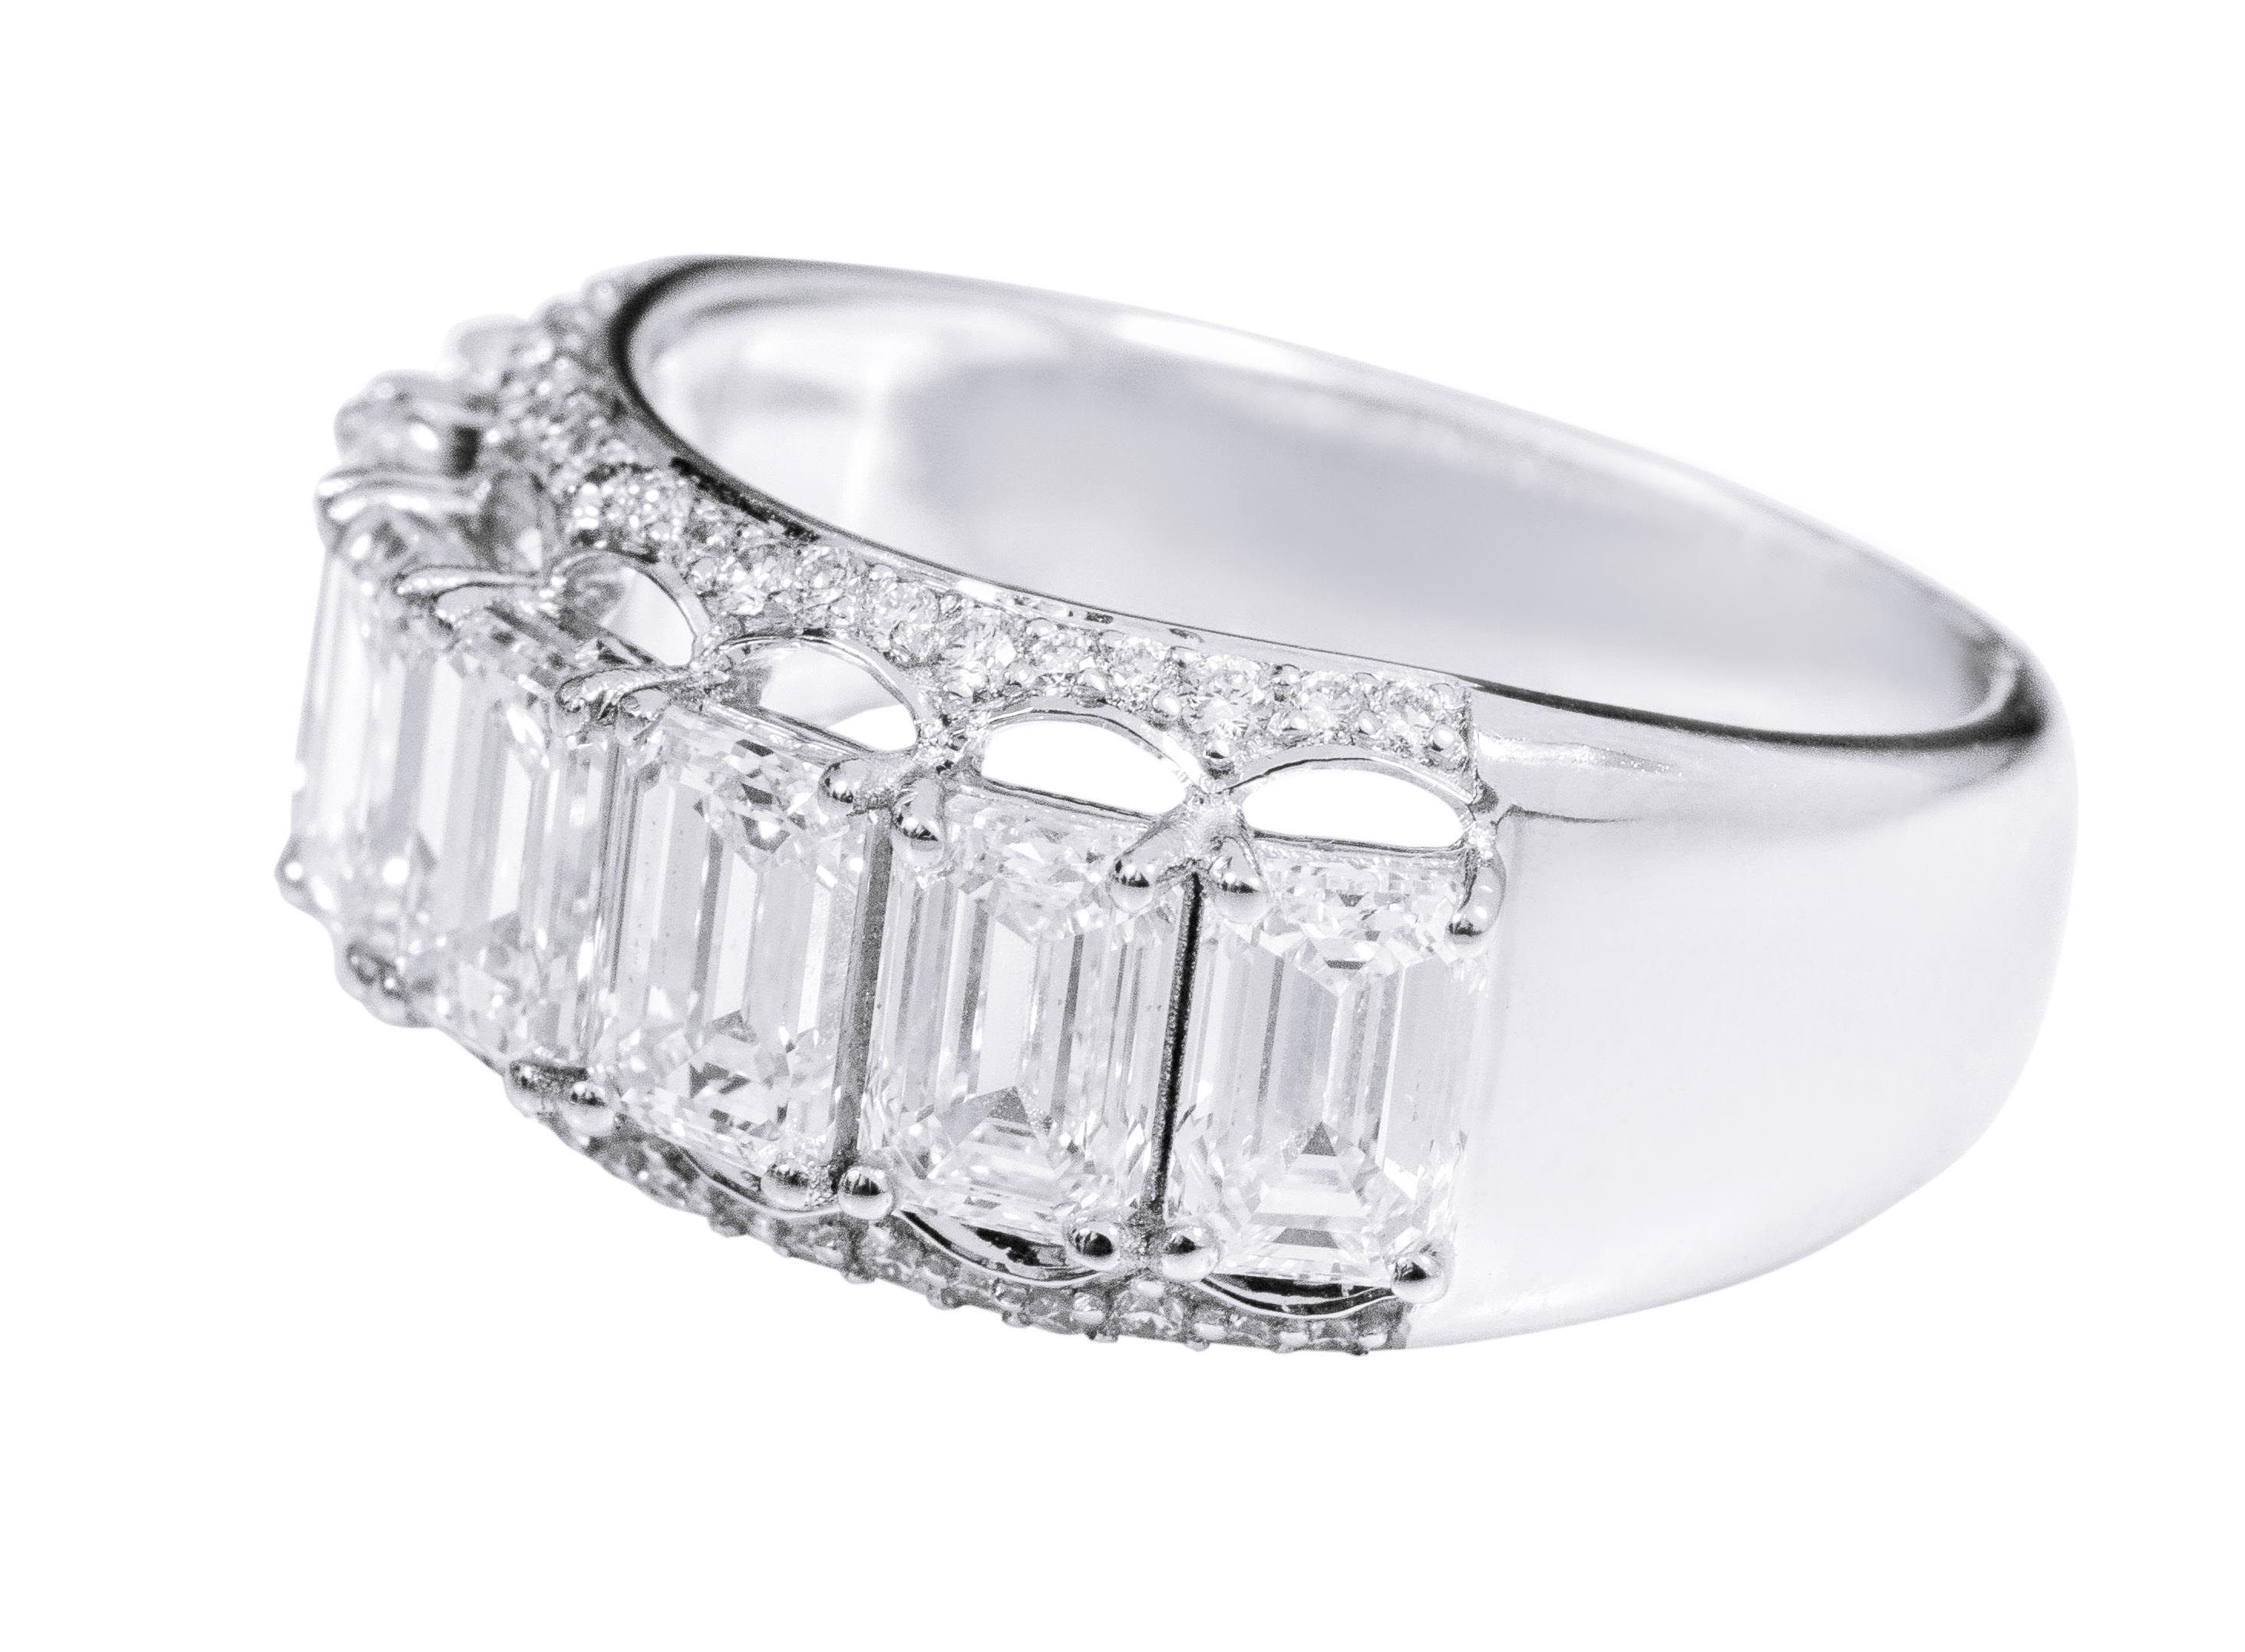 18 Karat White Gold 3.83 Carat Solitaire Emerald-Cut Diamond Half-Band Ring

This excellent diamond solitaire band is timeless. The eternity diamond half-band is elegantly set with 7 identical size and matching emerald cut 0.50 pointer diamonds